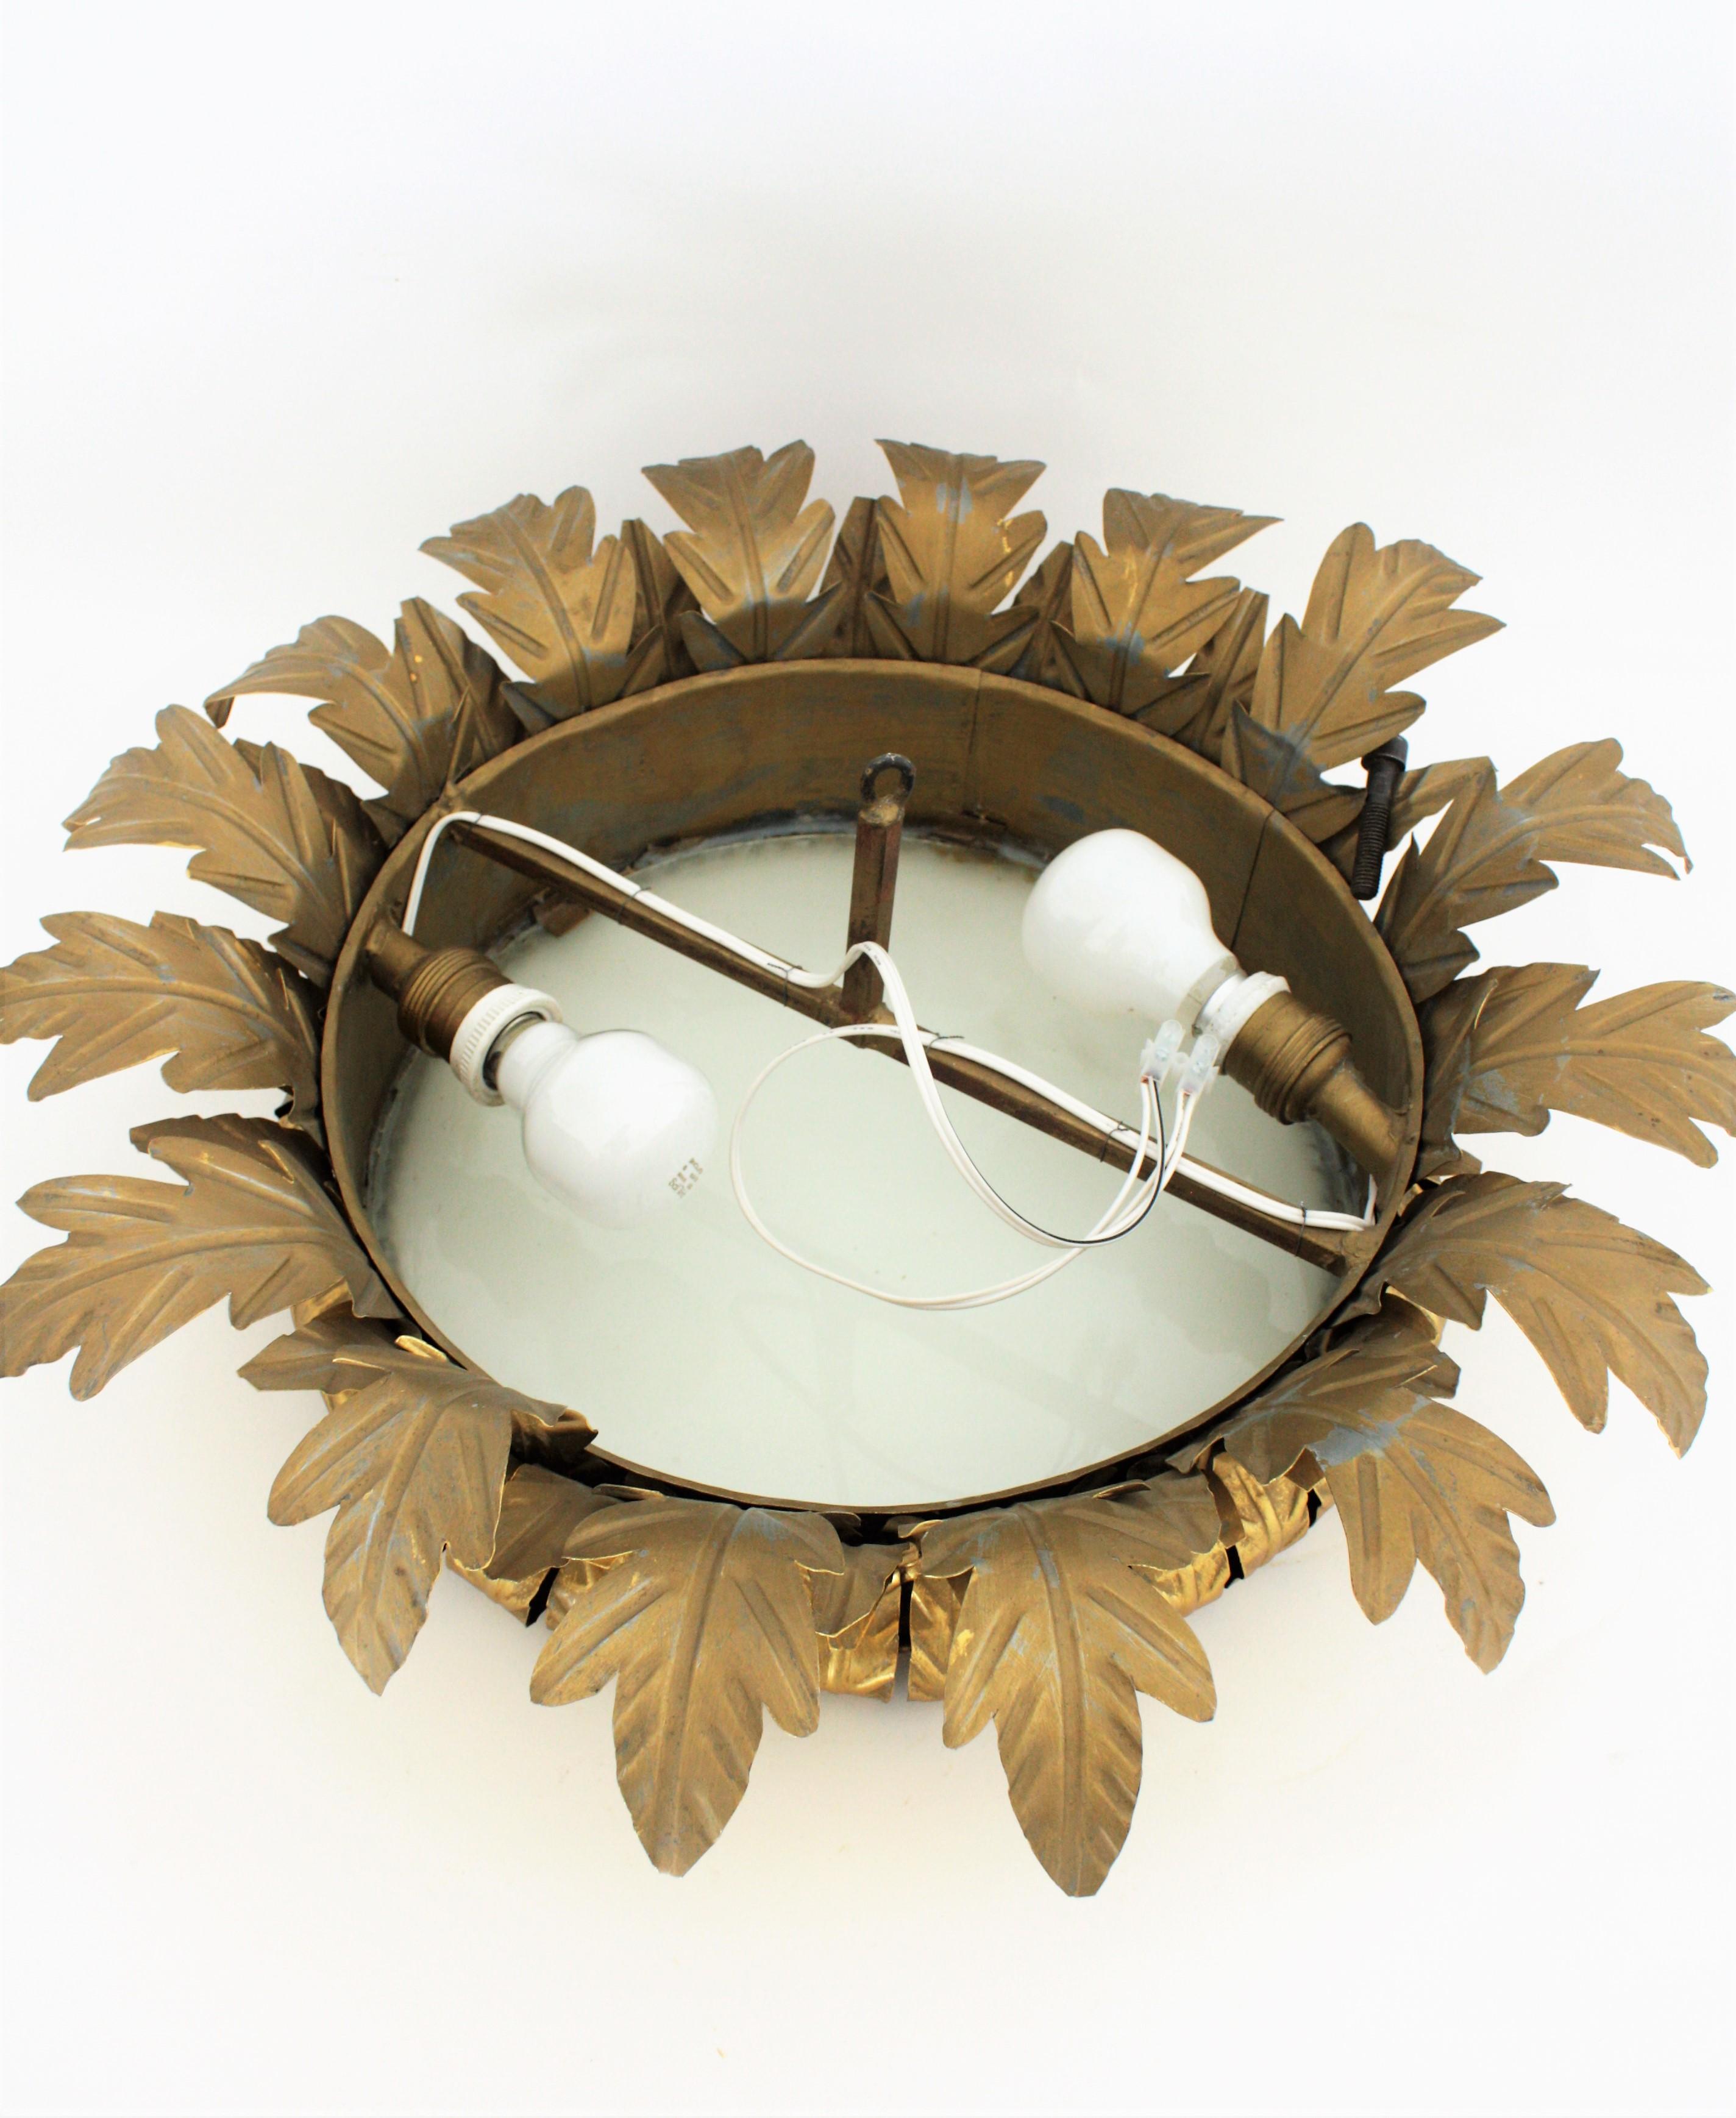 Sunburst Crown Large Ceiling Light Fixture in Gilt Metal and Frosted Glass 8